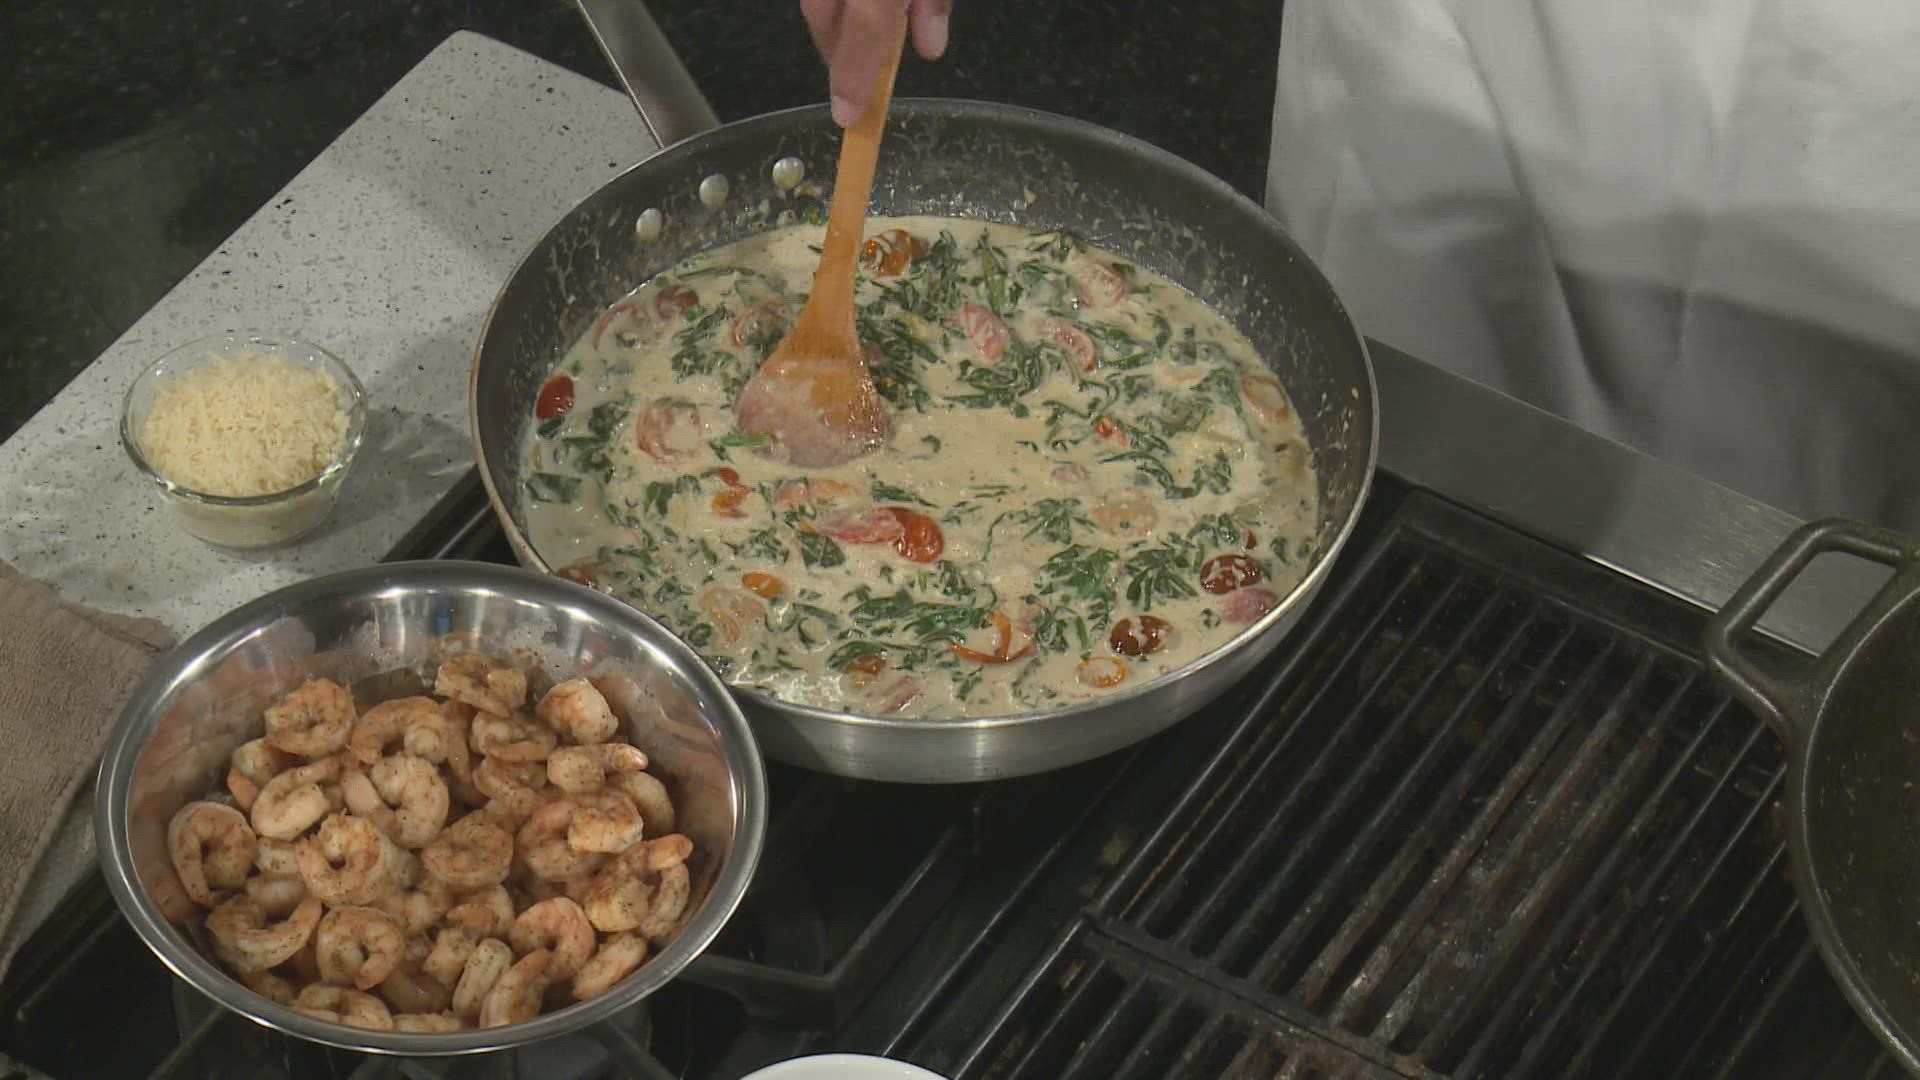 Chef Kev has a couple of great local-inspired recipes in honor of Eat Local Day.